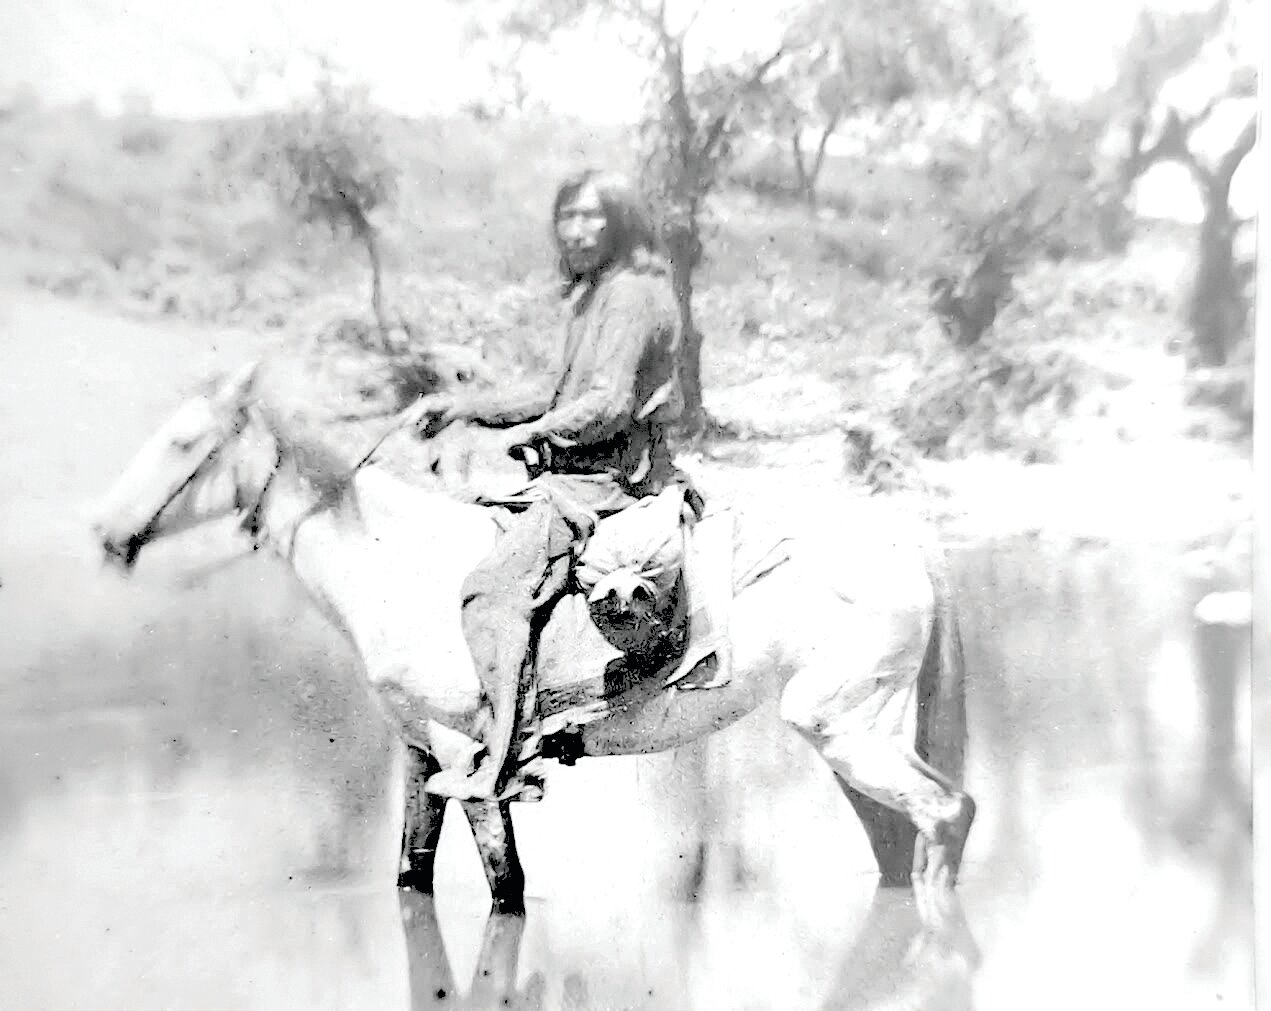 Former Paris photographer I.R. Martin was out photographing the countryside near Sugar Creek when he
captured this Native American on horseback. Lore claimed this Native American was probably one of the
last in the area.